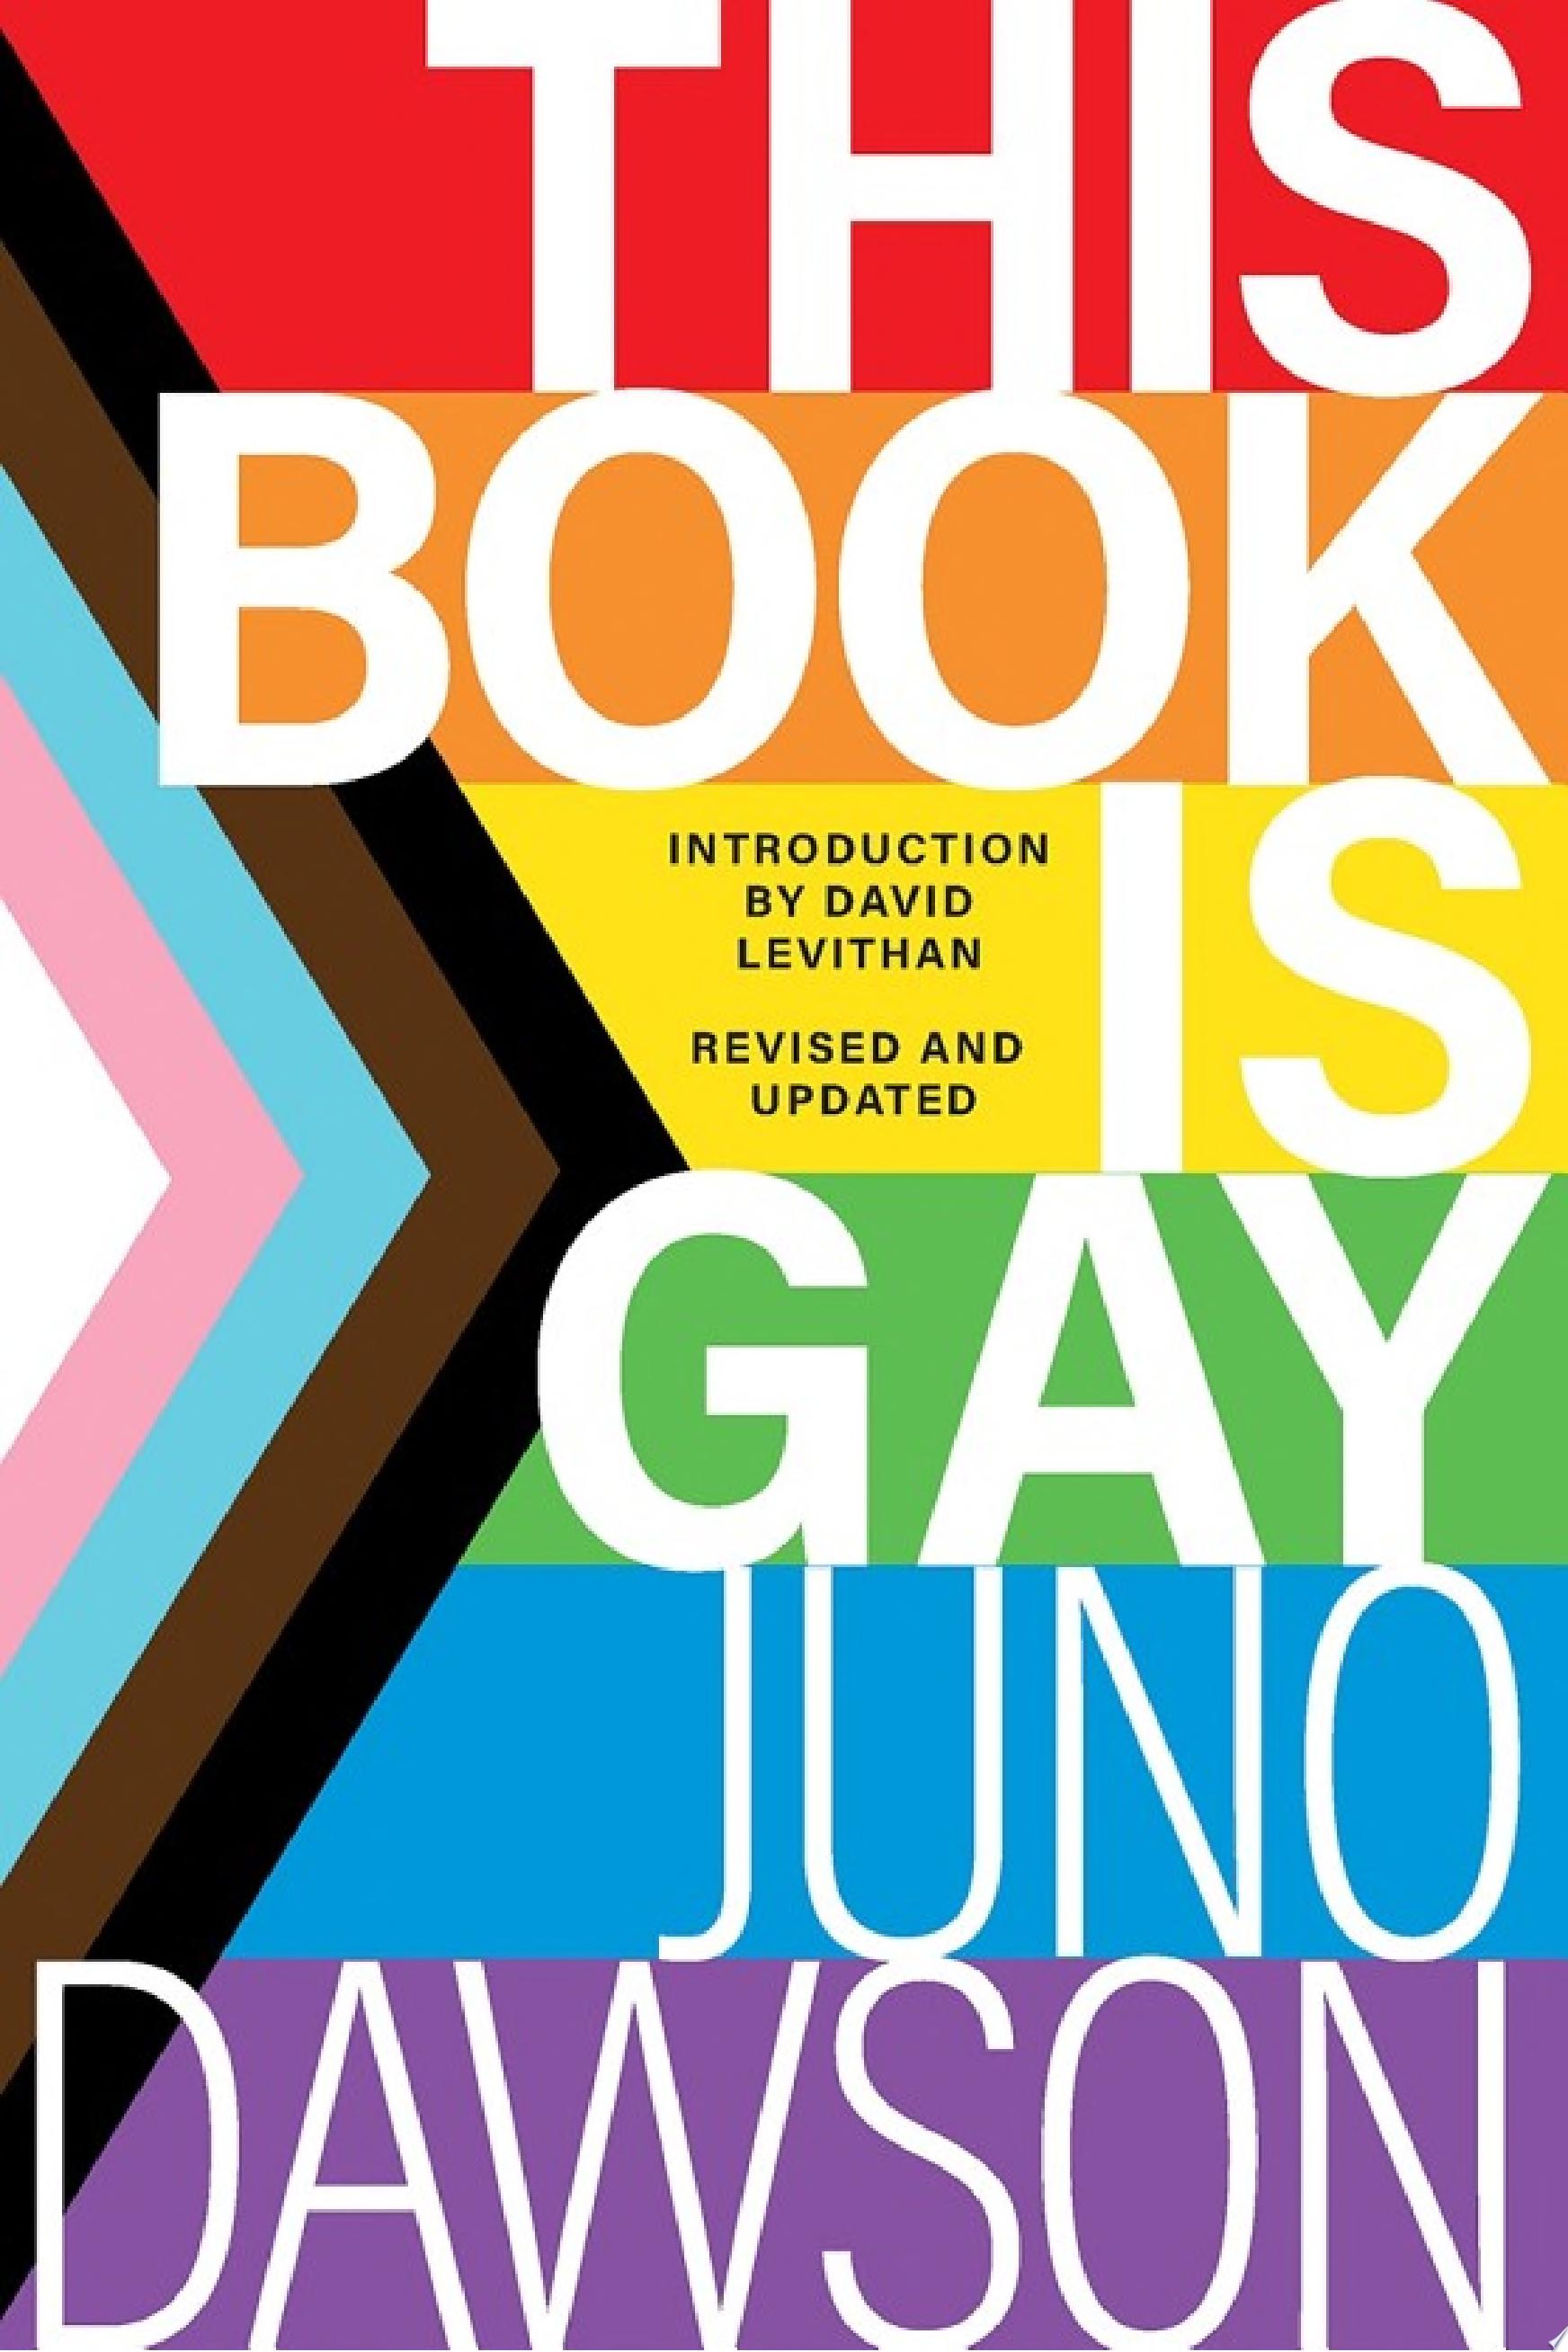 Image for "This Book Is Gay"